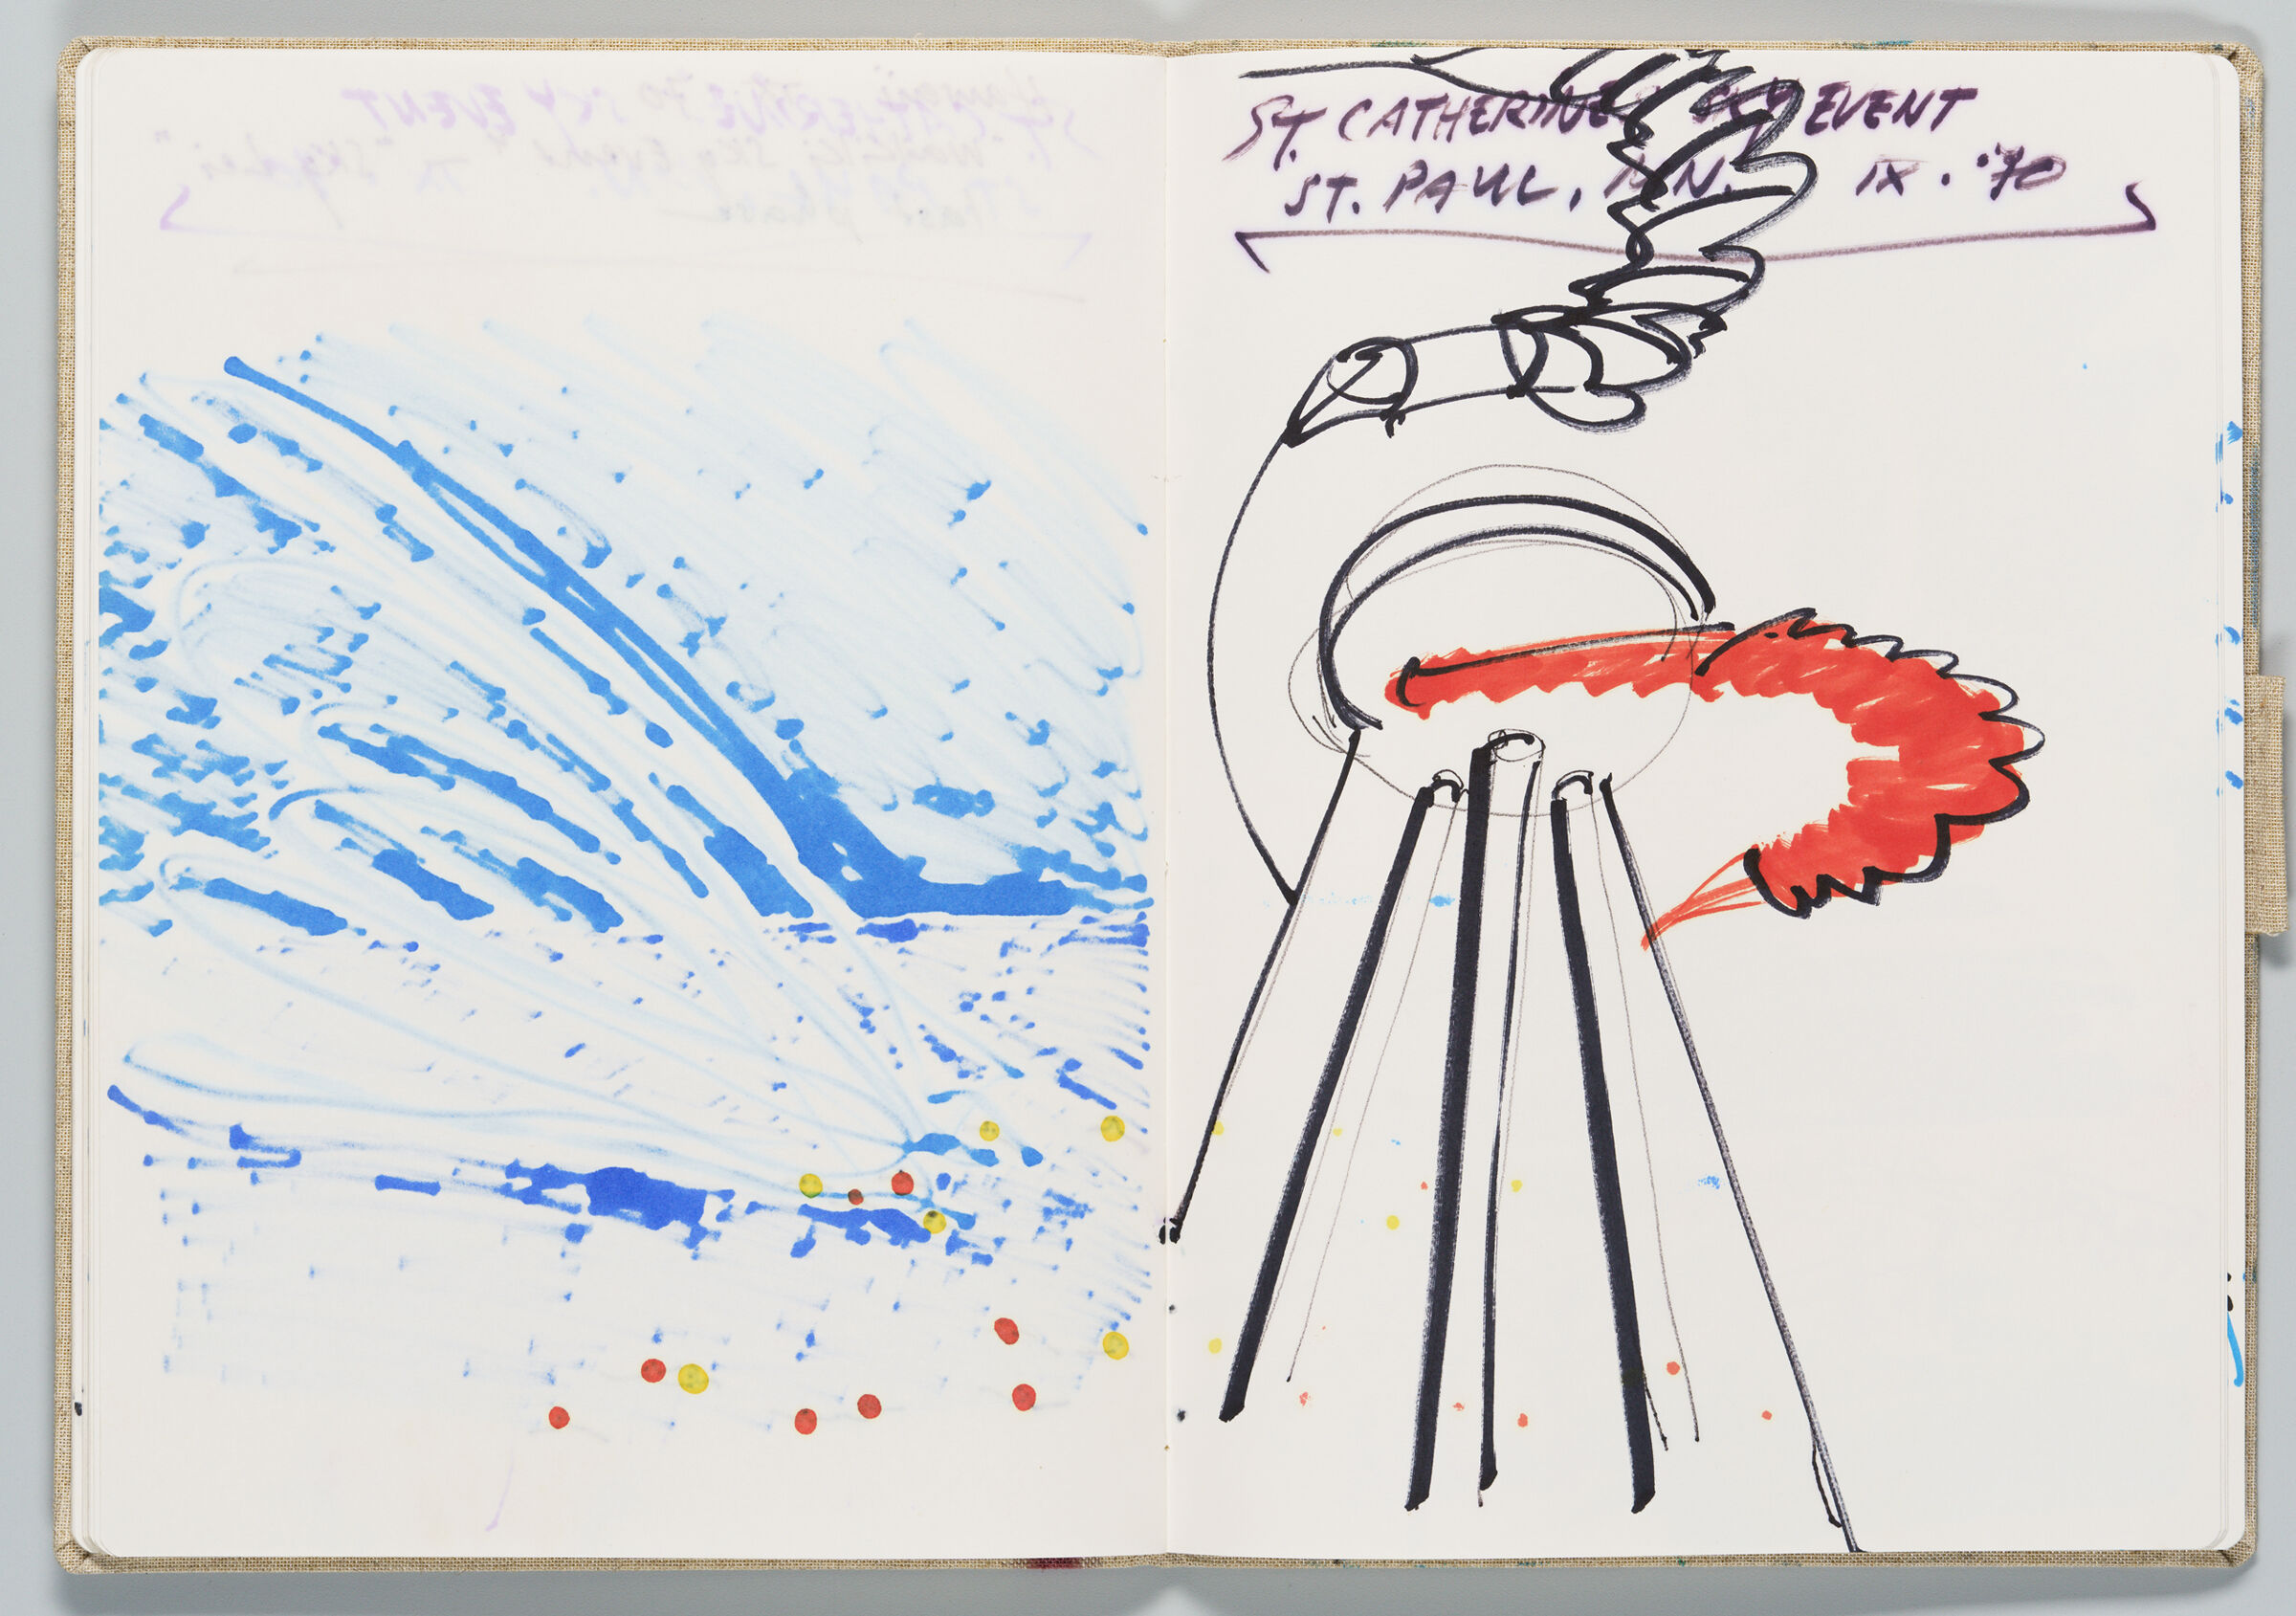 Untitled (Bleed-Through Of Previous Page With Color Transfer, Left Page); Untitled (Sketch Of Past Sky Event With Color Transfer, Right Page)